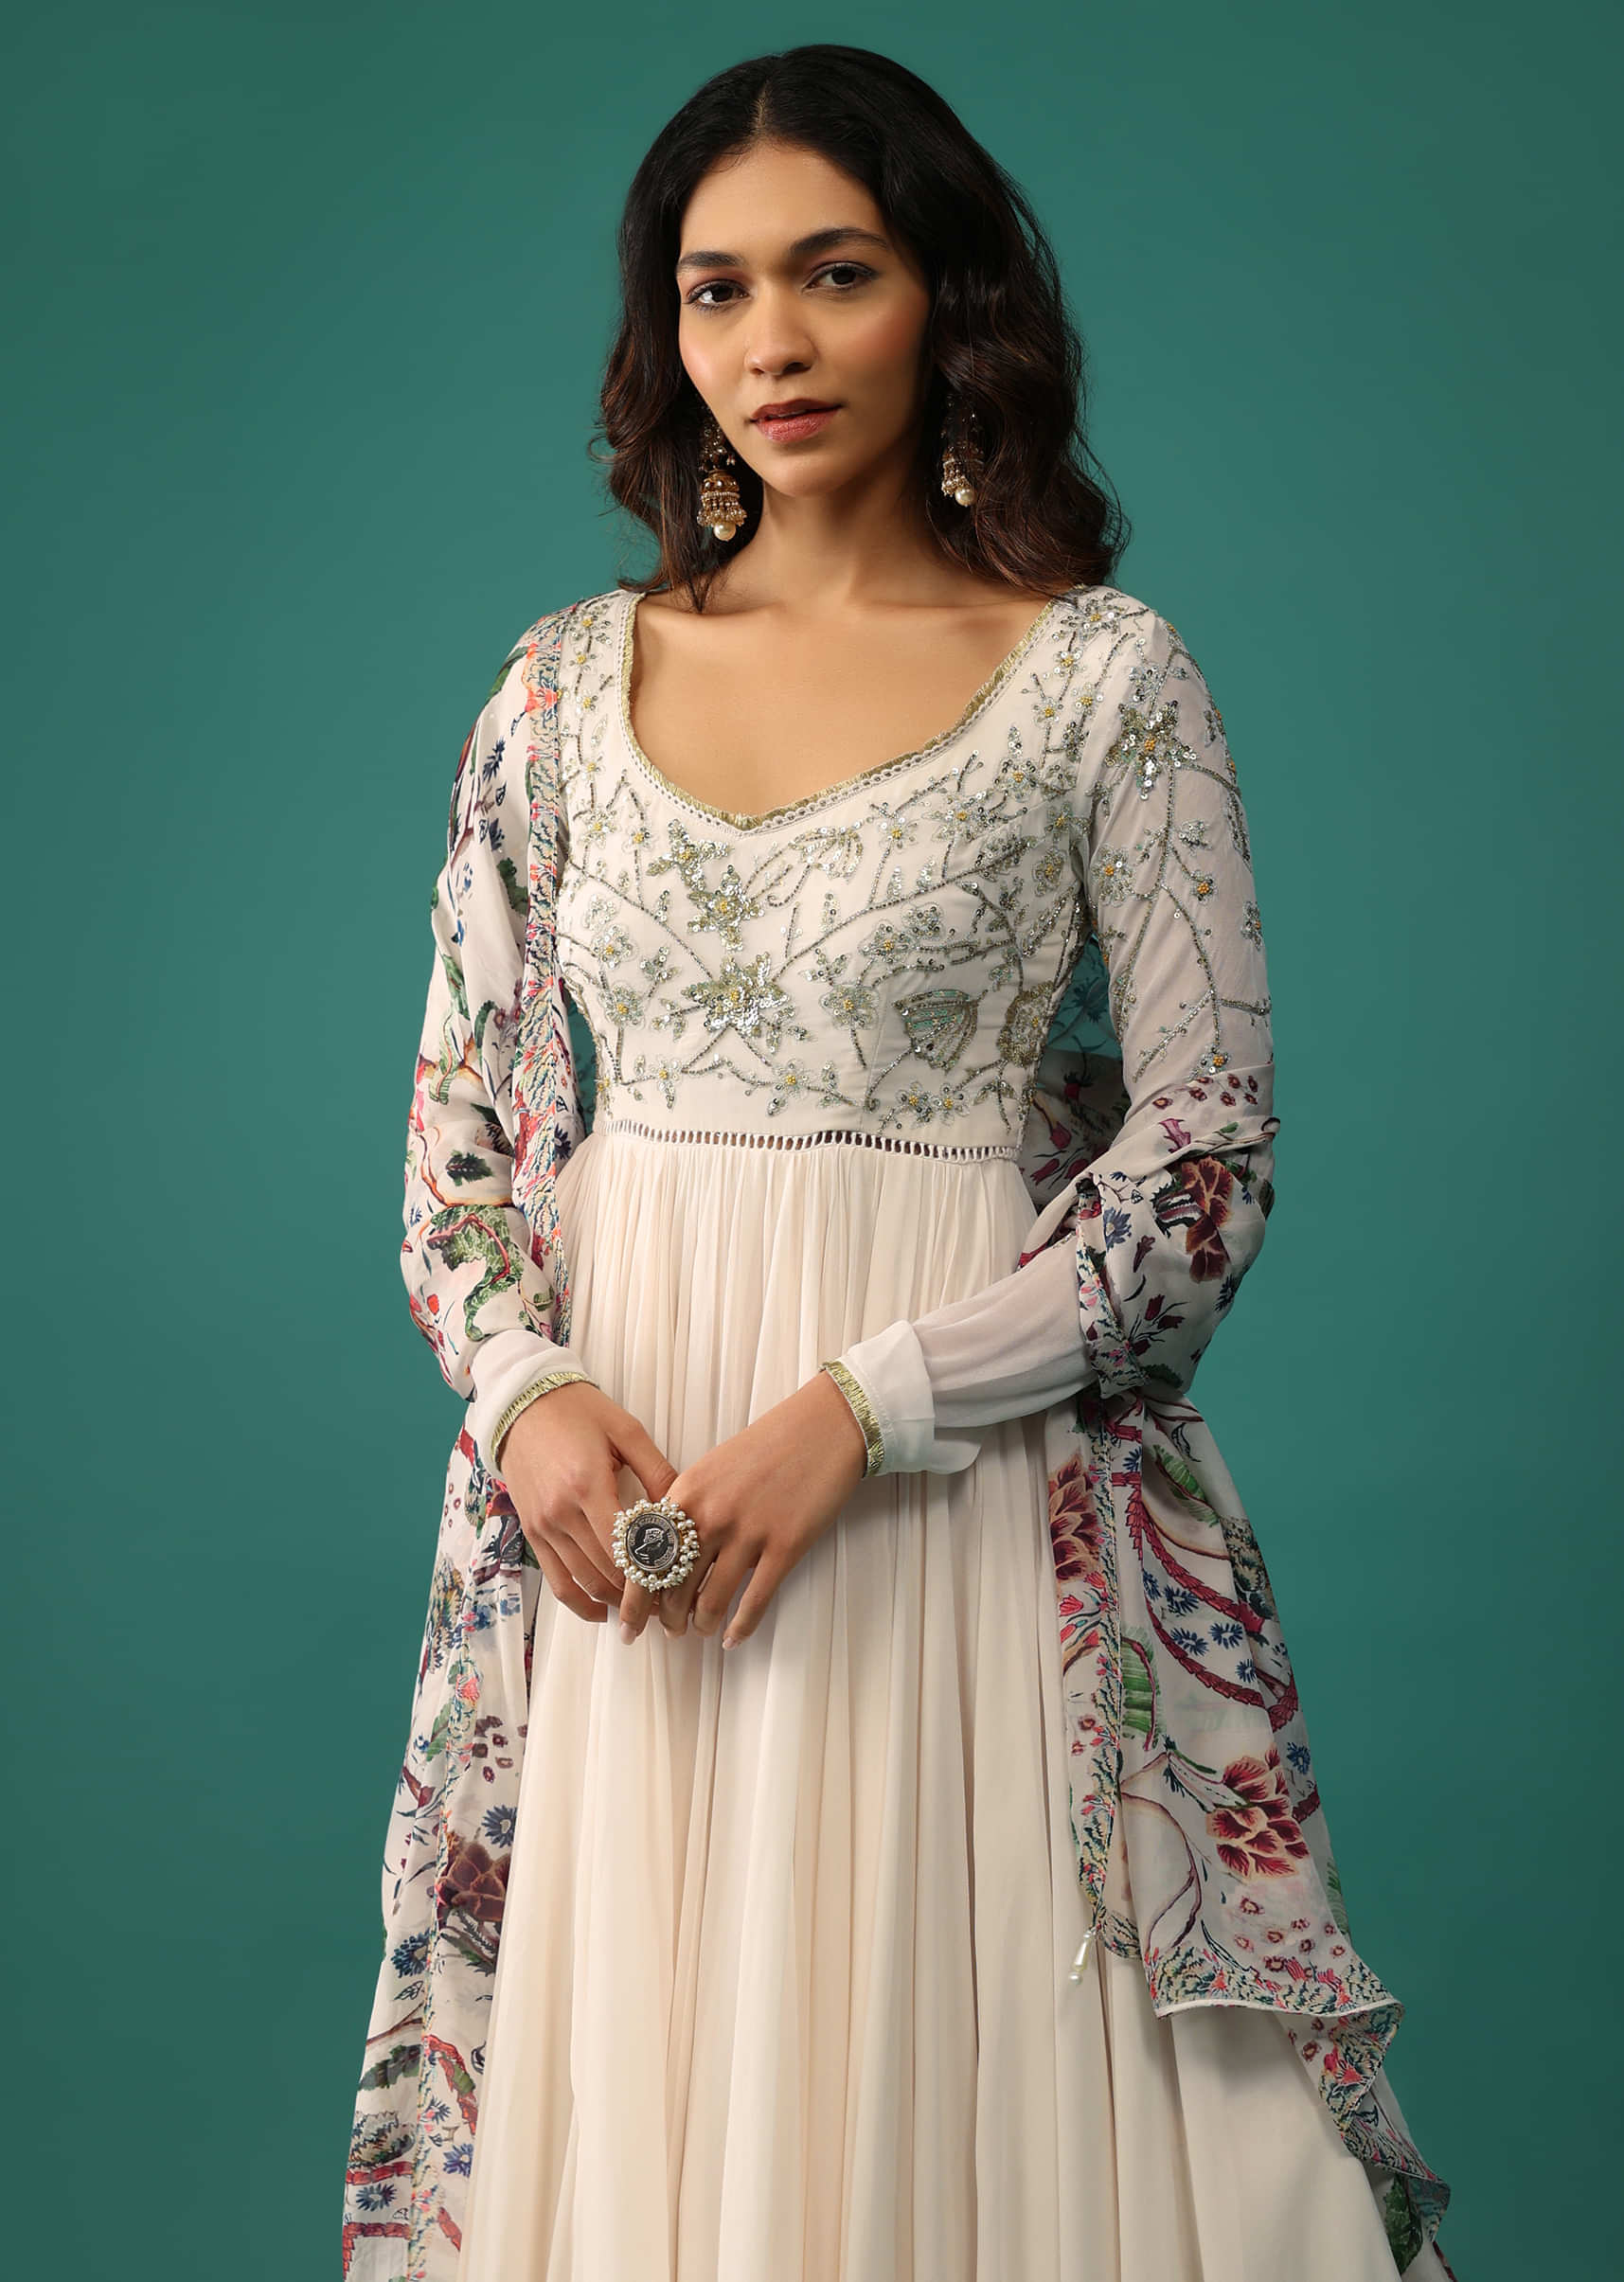 Amazonin OffWhite  Gowns  Ethnic Wear Clothing  Accessories